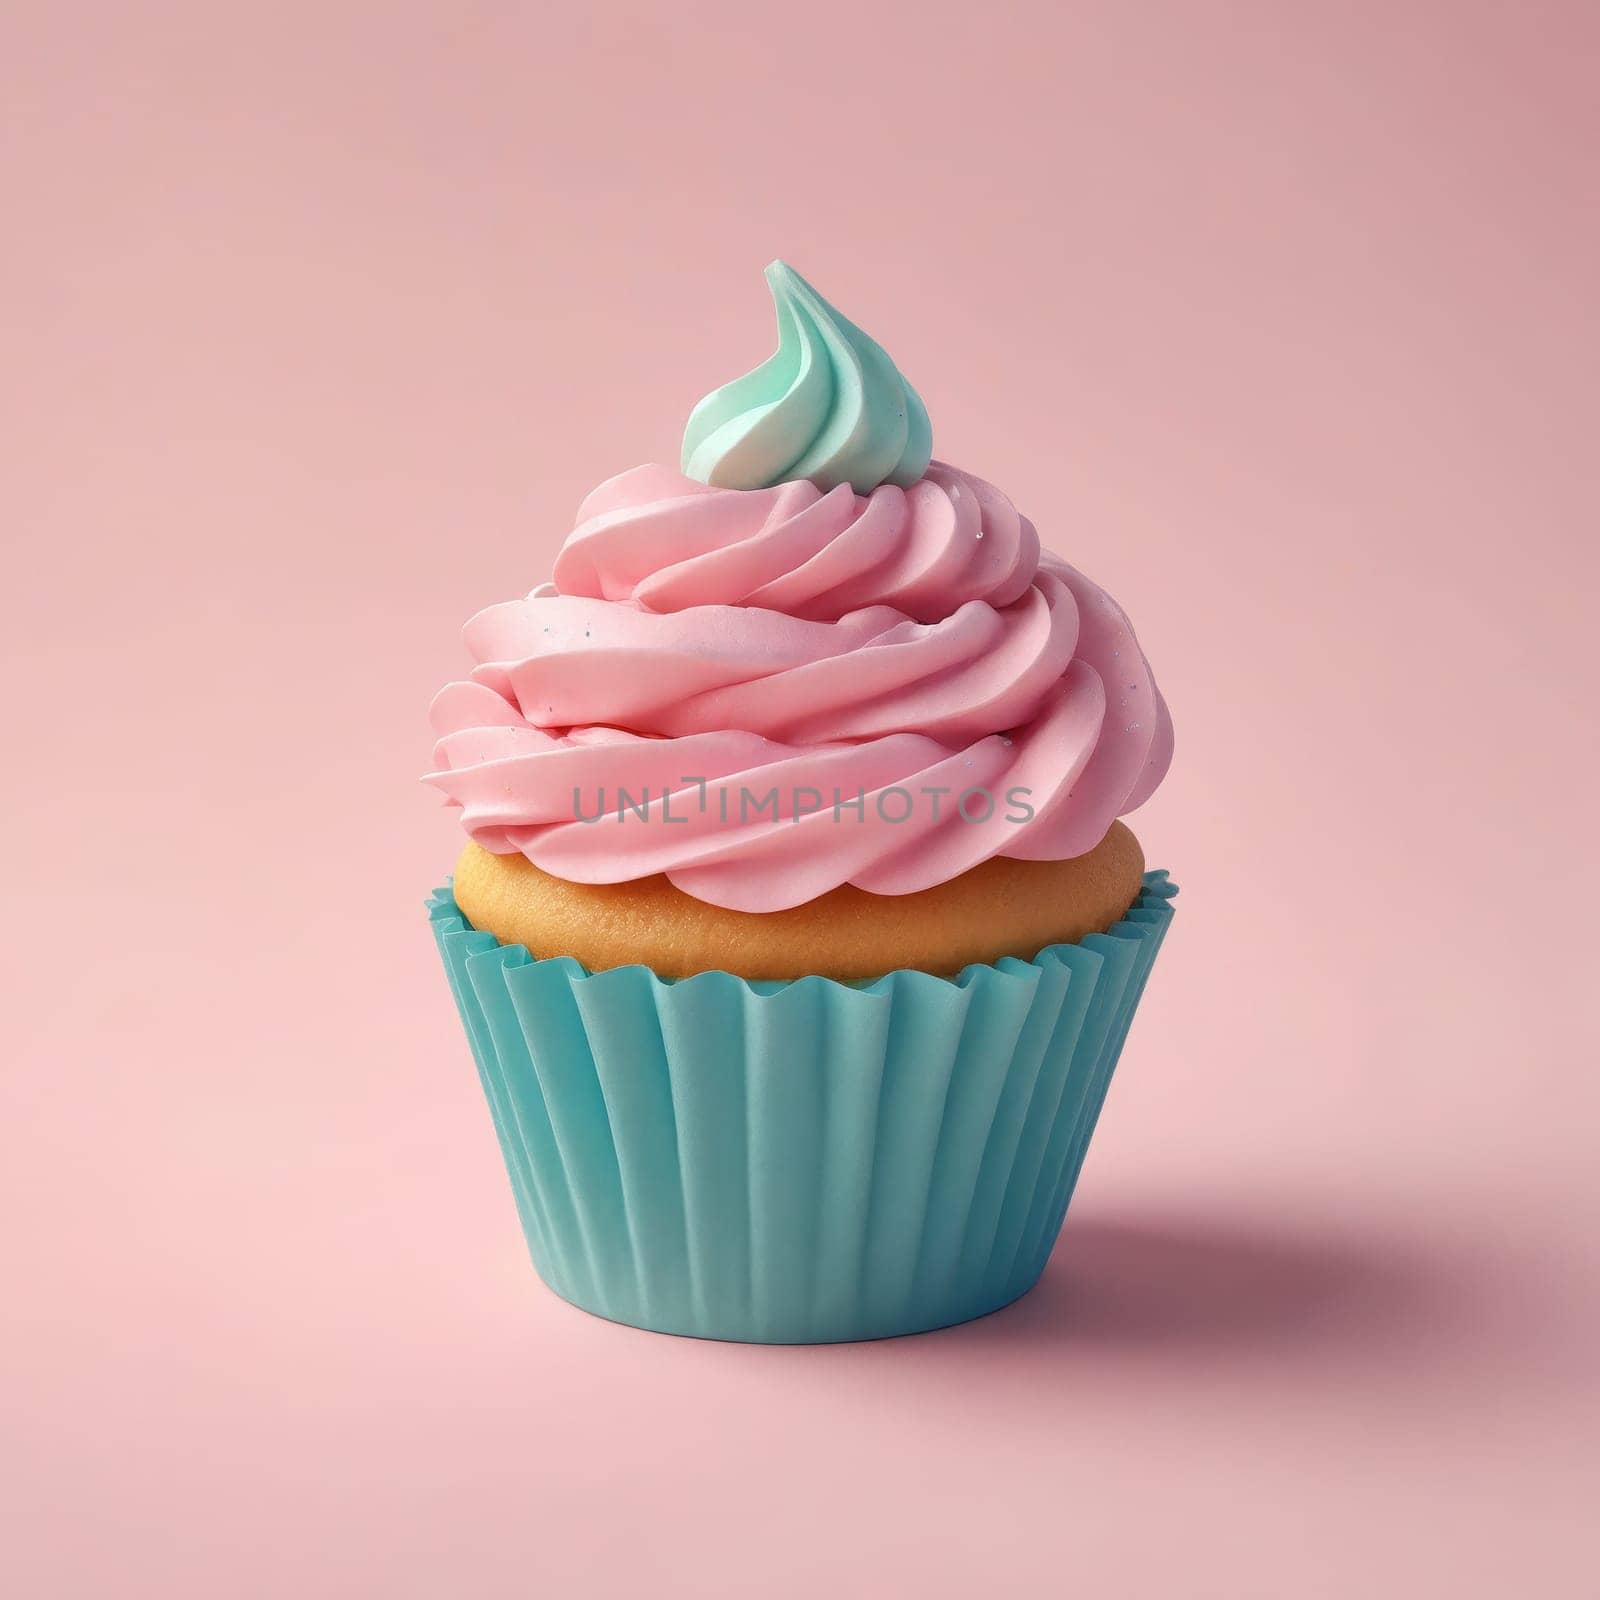 A sweet cupcake with pink and blue frosting, sprinkles, on a pink background by Andre1ns